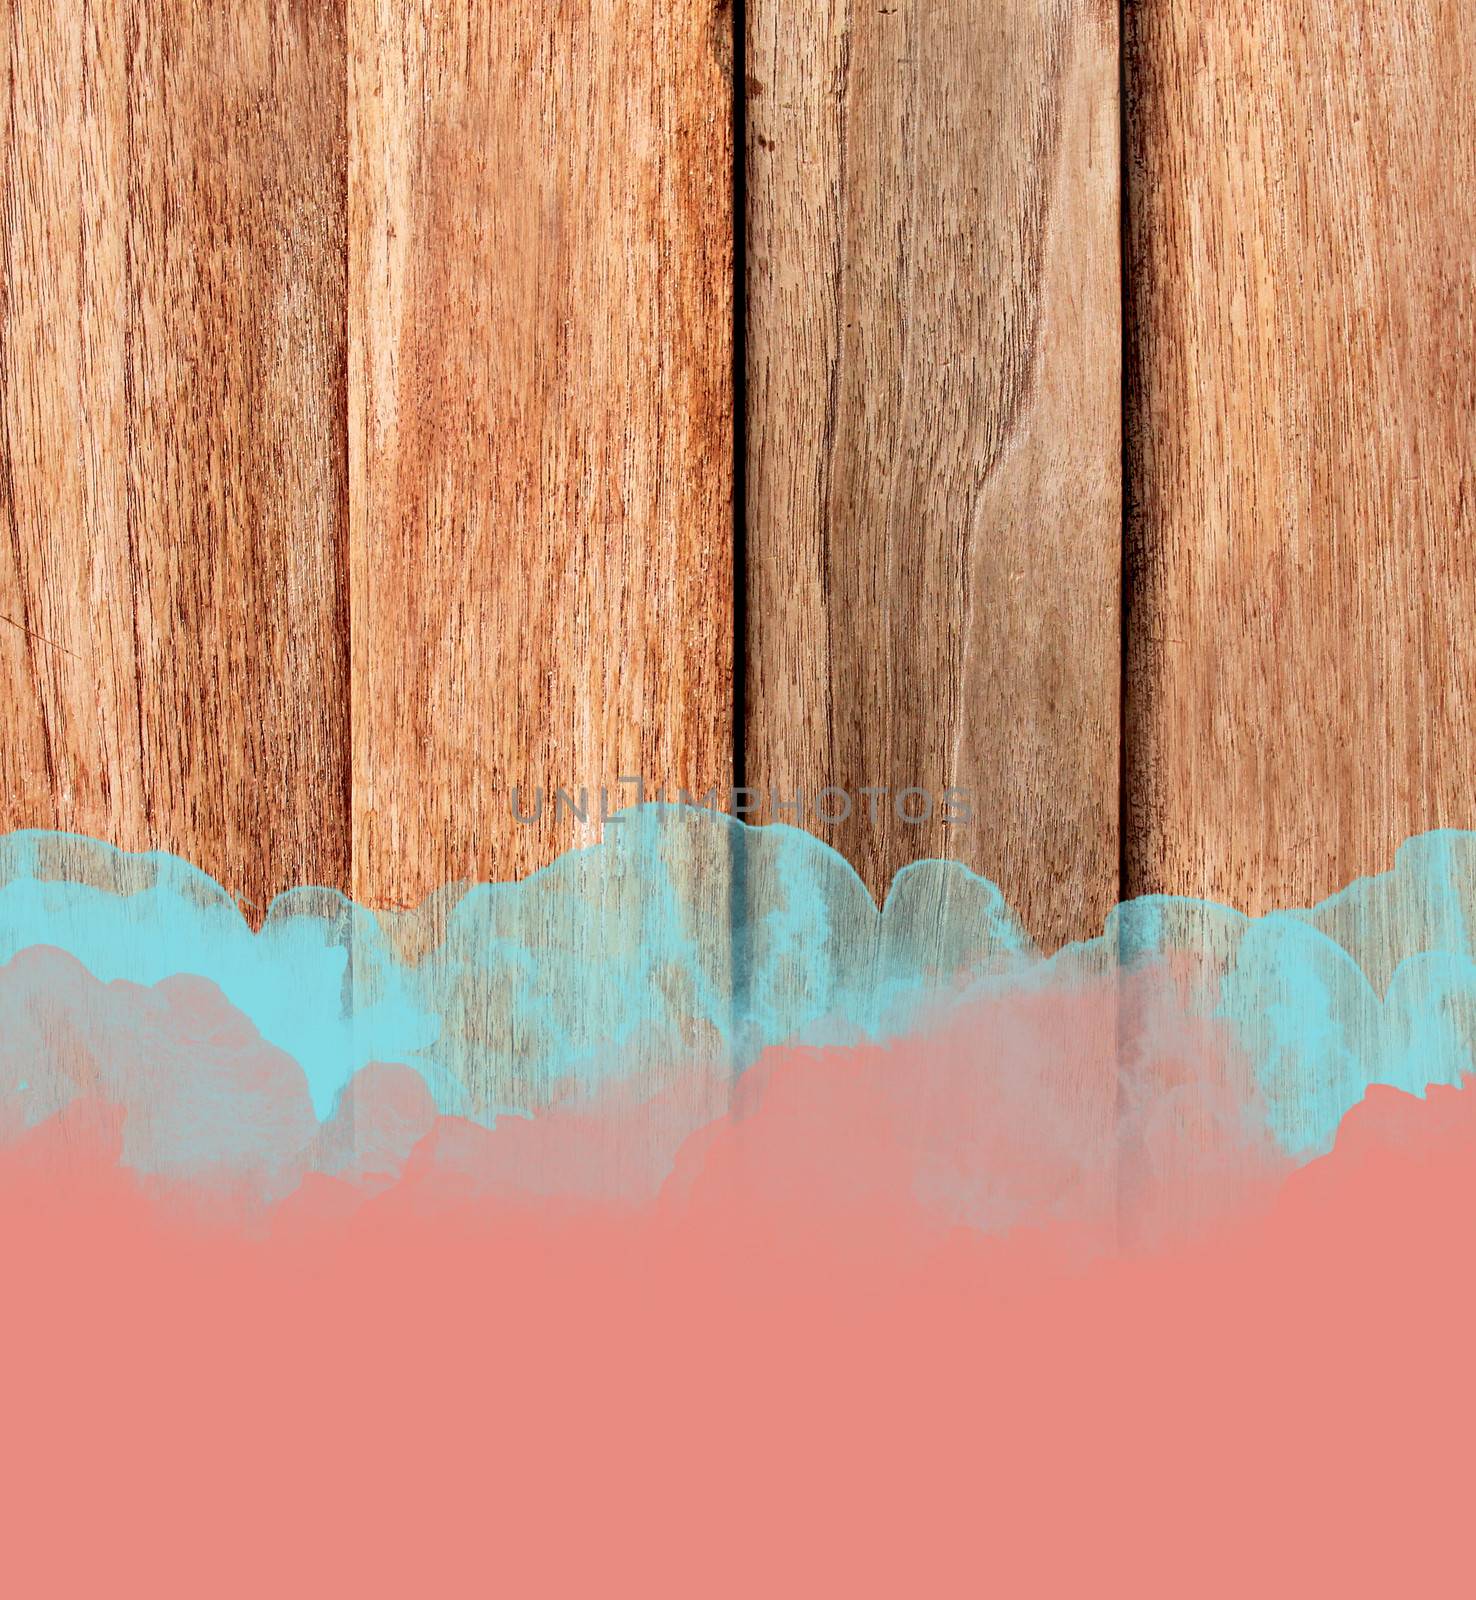 Blue and red stroke of the paint brush on wooden background  by nuchylee